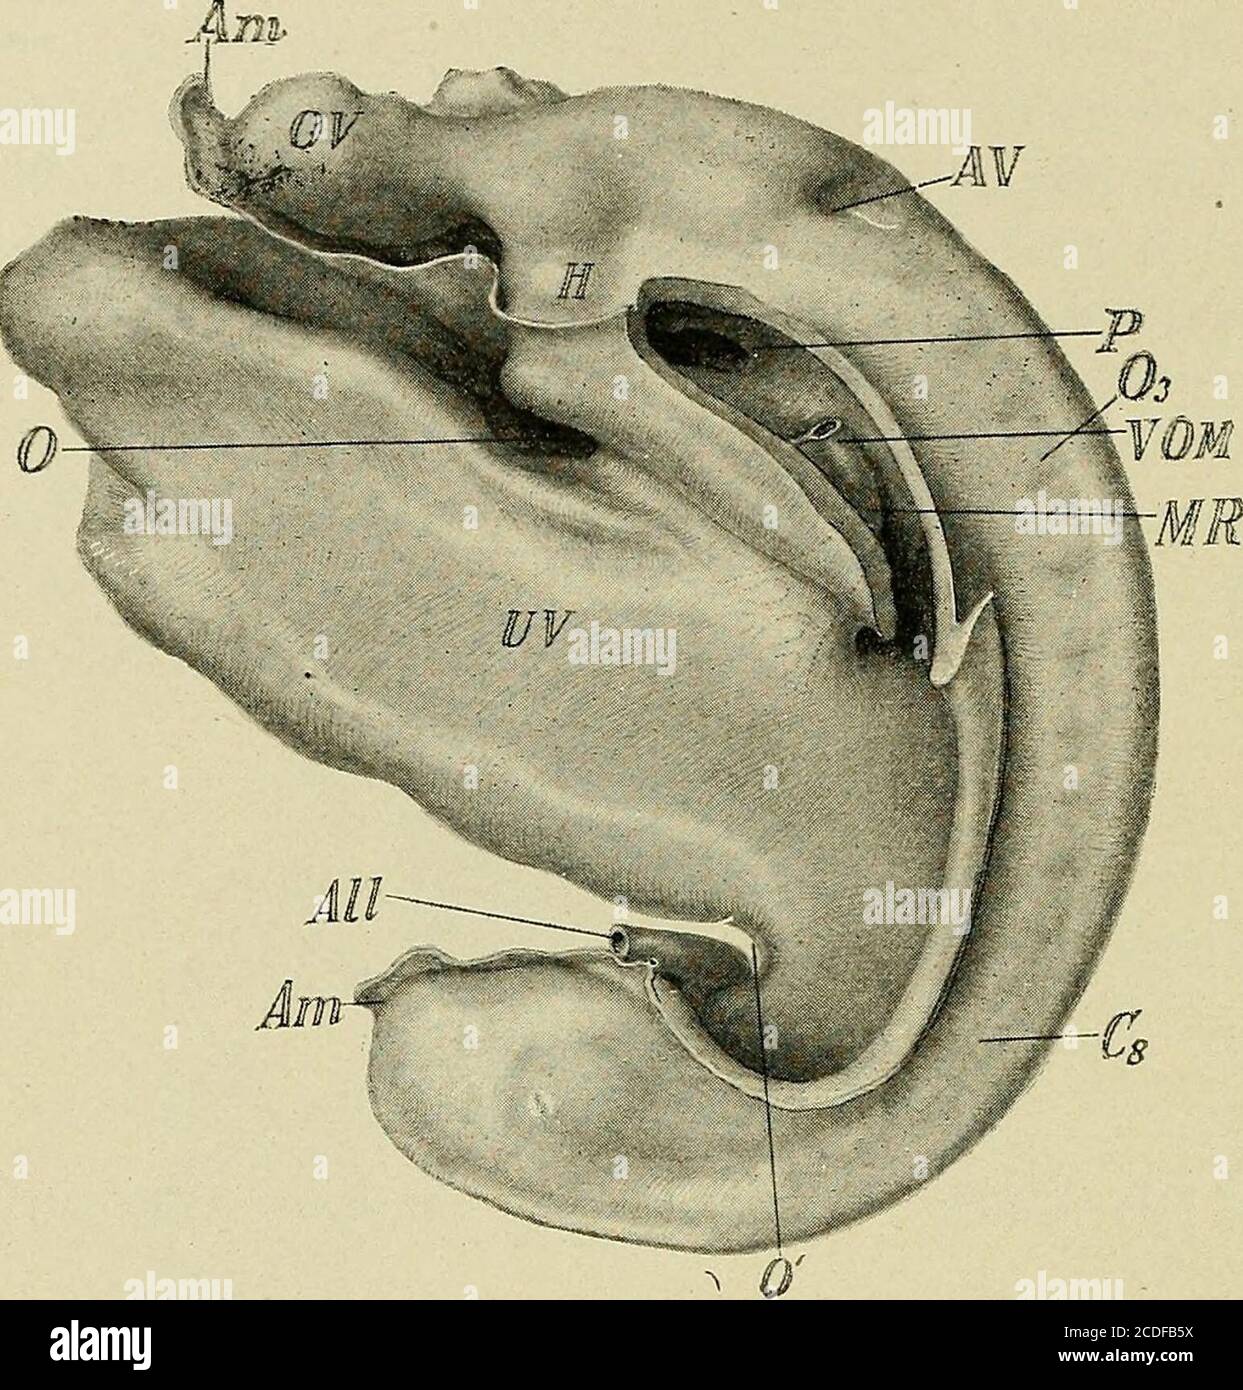 . A study of the causes underlying the origin of human monsters : third contribution to the study of the pathology of human embryos . Fig. 12b.—Diagrammatic reconstruction of half the ovum with the embryoattached. X 10 times. The villi are drawn upon the upper half ofthe diagram only. Coe, coelom; uv, umbilical vesicle; all, allantois;Dip, medullary plate. the central canal too wide open, and the optic vesicles tooatrophic to be normal. The spinal cord is also too wide openbehind. The embryo could be viewed as normal with the ex-ception of the spina bifida in the lower part of the cord andthe Stock Photo